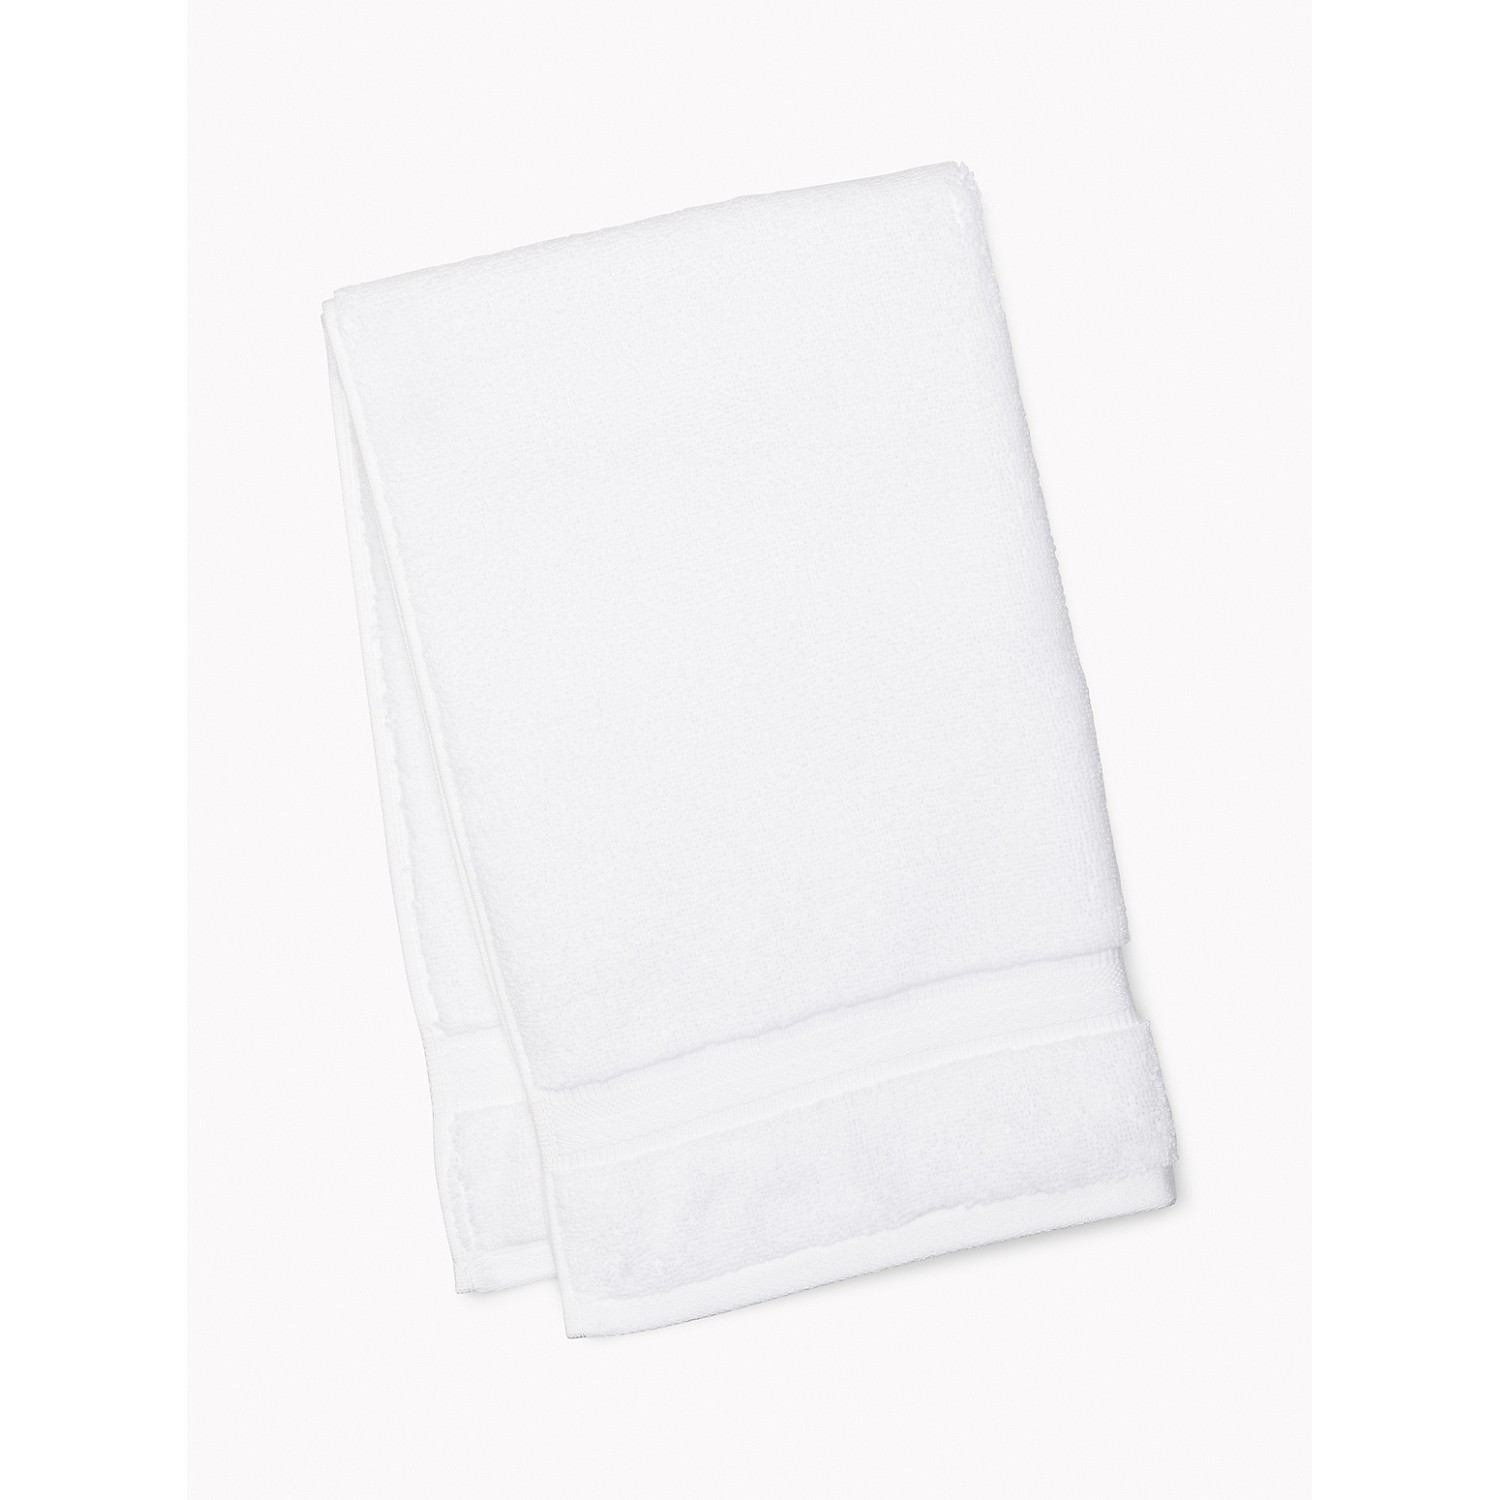 TOMMY HILFIGER Signature Solid Hand Towel in White